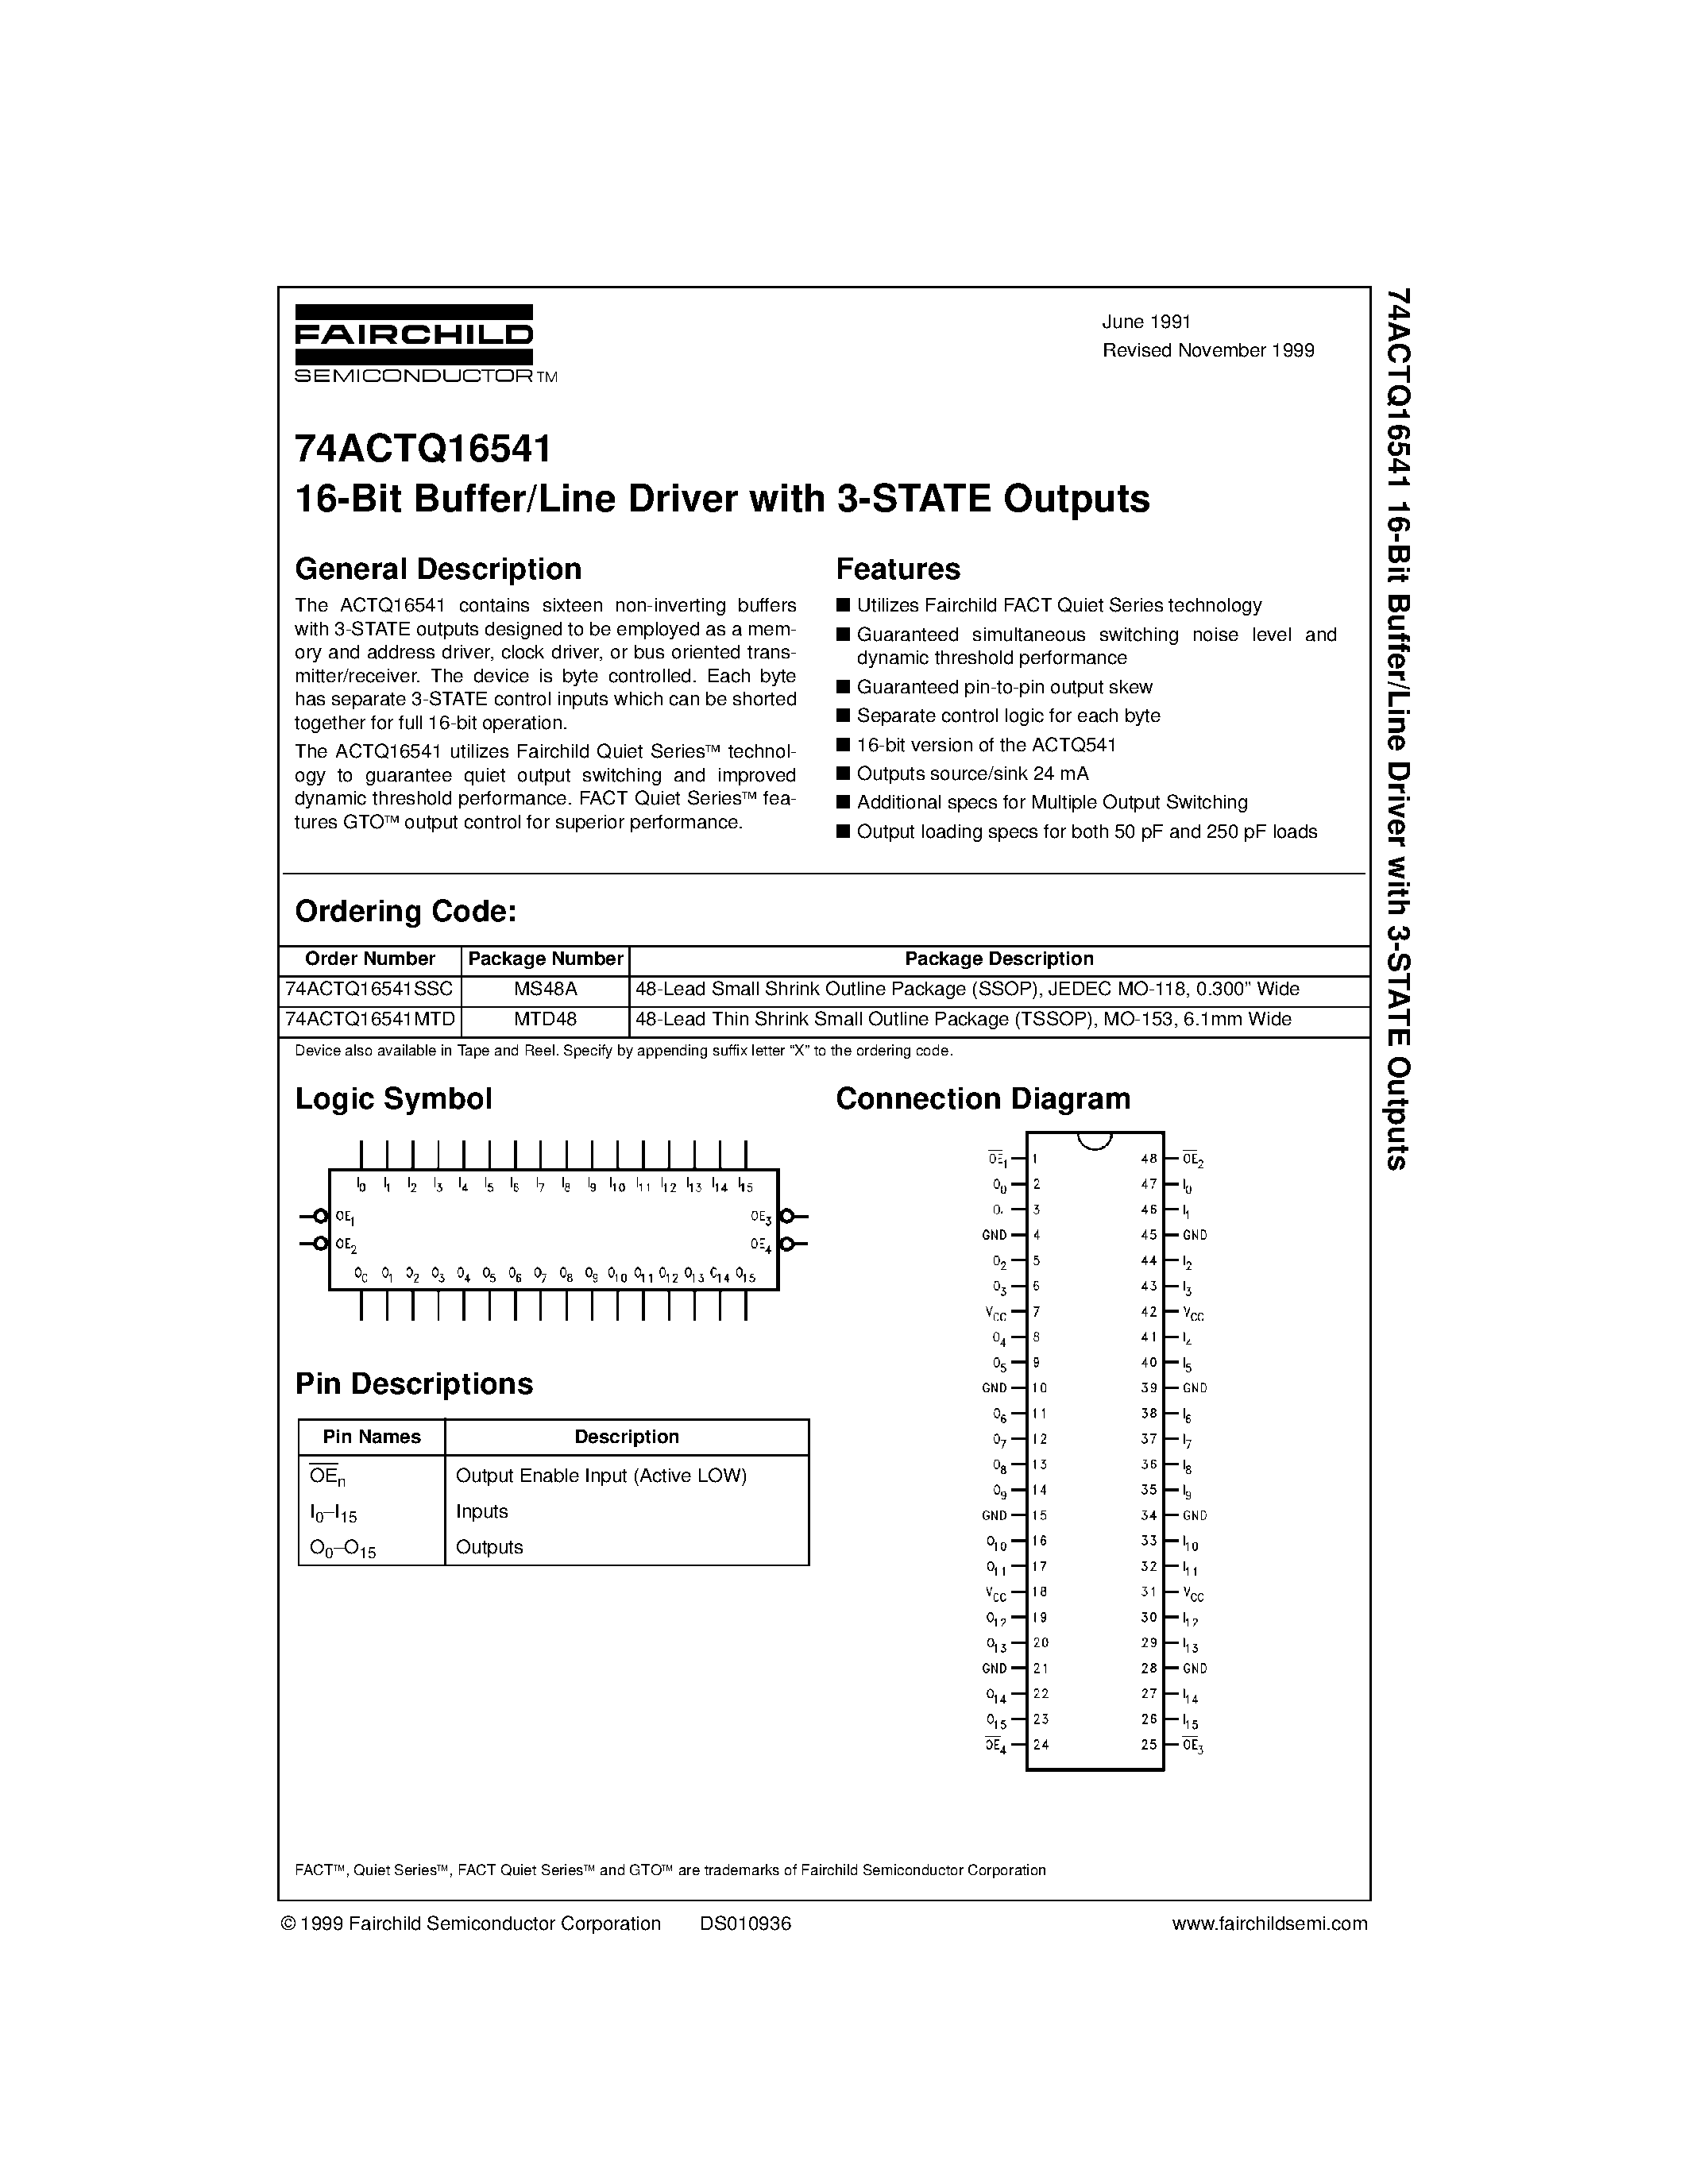 Datasheet 74ACTQ16541SSC - 16-Bit Buffer/Line Driver with 3-STATE Outputs page 1